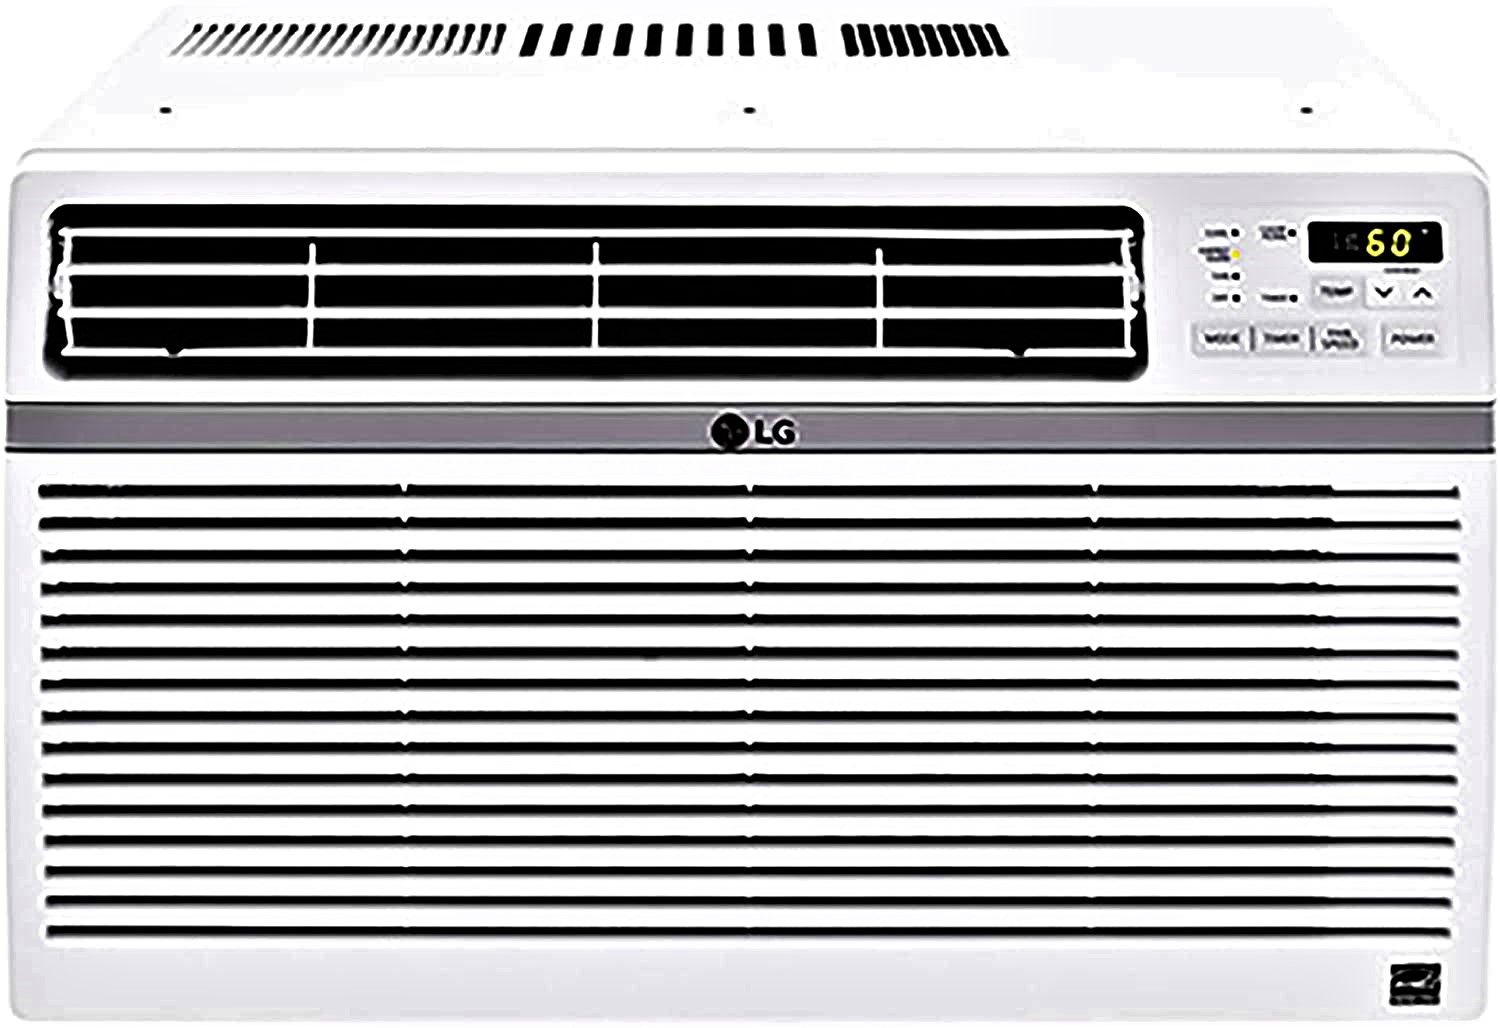 710R QWTm5L. AC SL1500 10 BEST AIR CONDITIONERS FOR YOUR GARAGE 2021 REVIEW